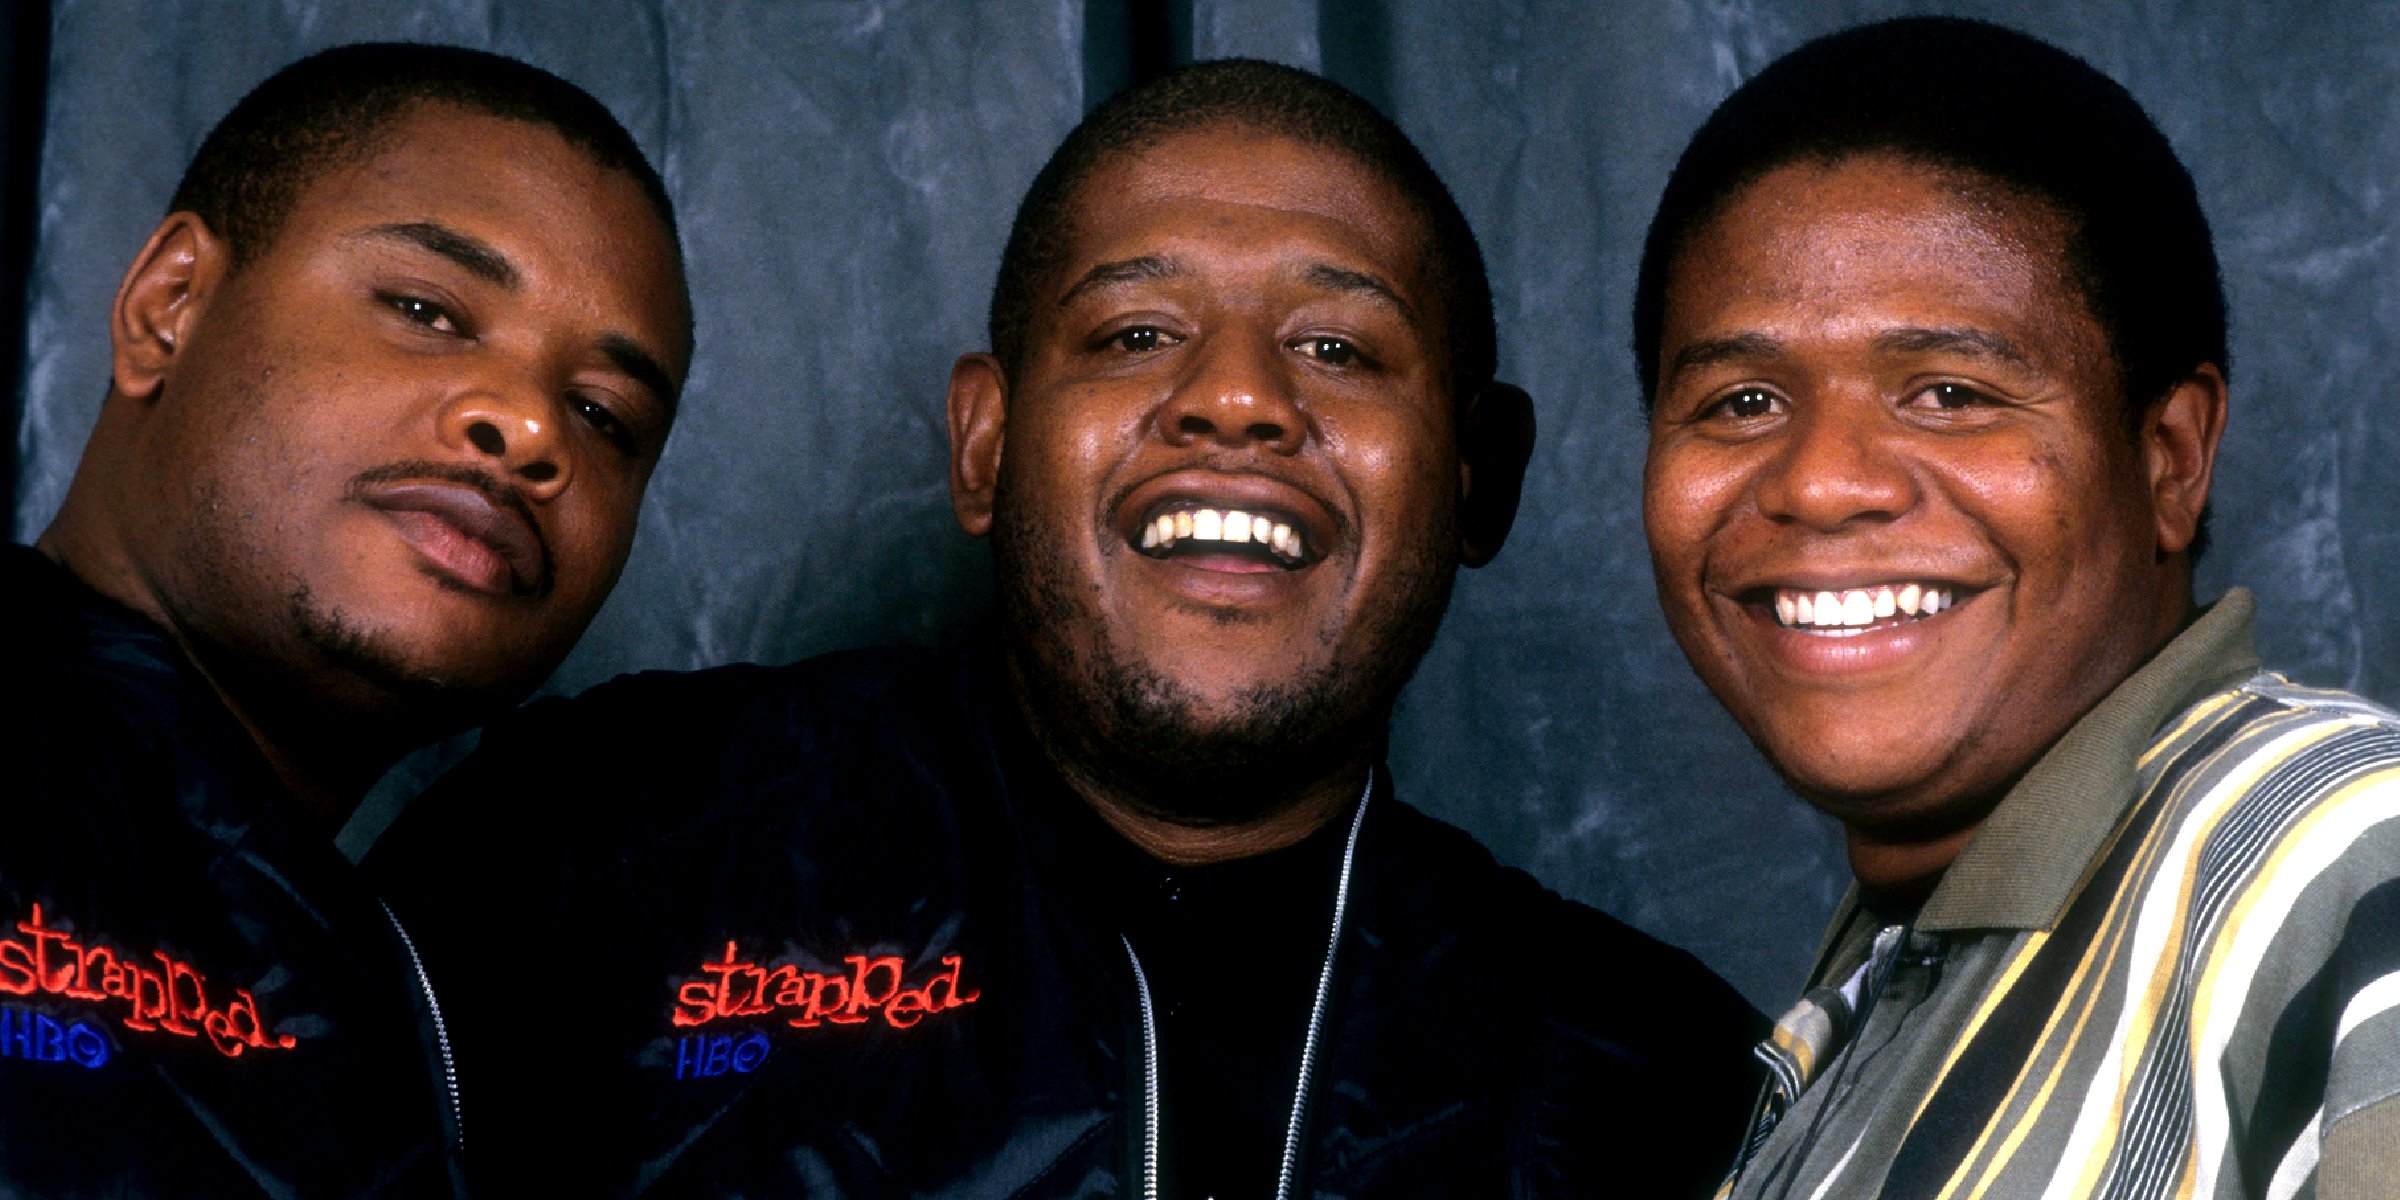 Kenn Whitaker, Forest Whitaker, and Damon Whitaker, 1993 | Source: Getty Images